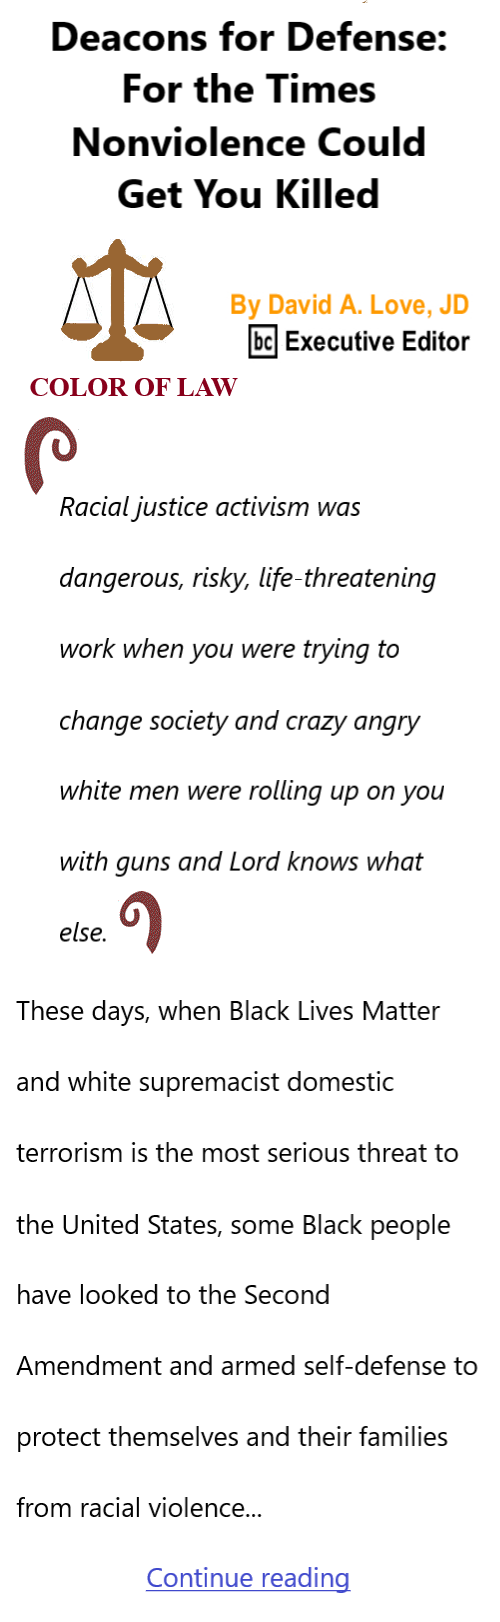 BlackCommentator.com May 23, 2024 - Issue 1002: Deacons for Defense: For the Times Nonviolence Could Get You Killed - Color of Law By David A. Love, JD, BC Executive Editor